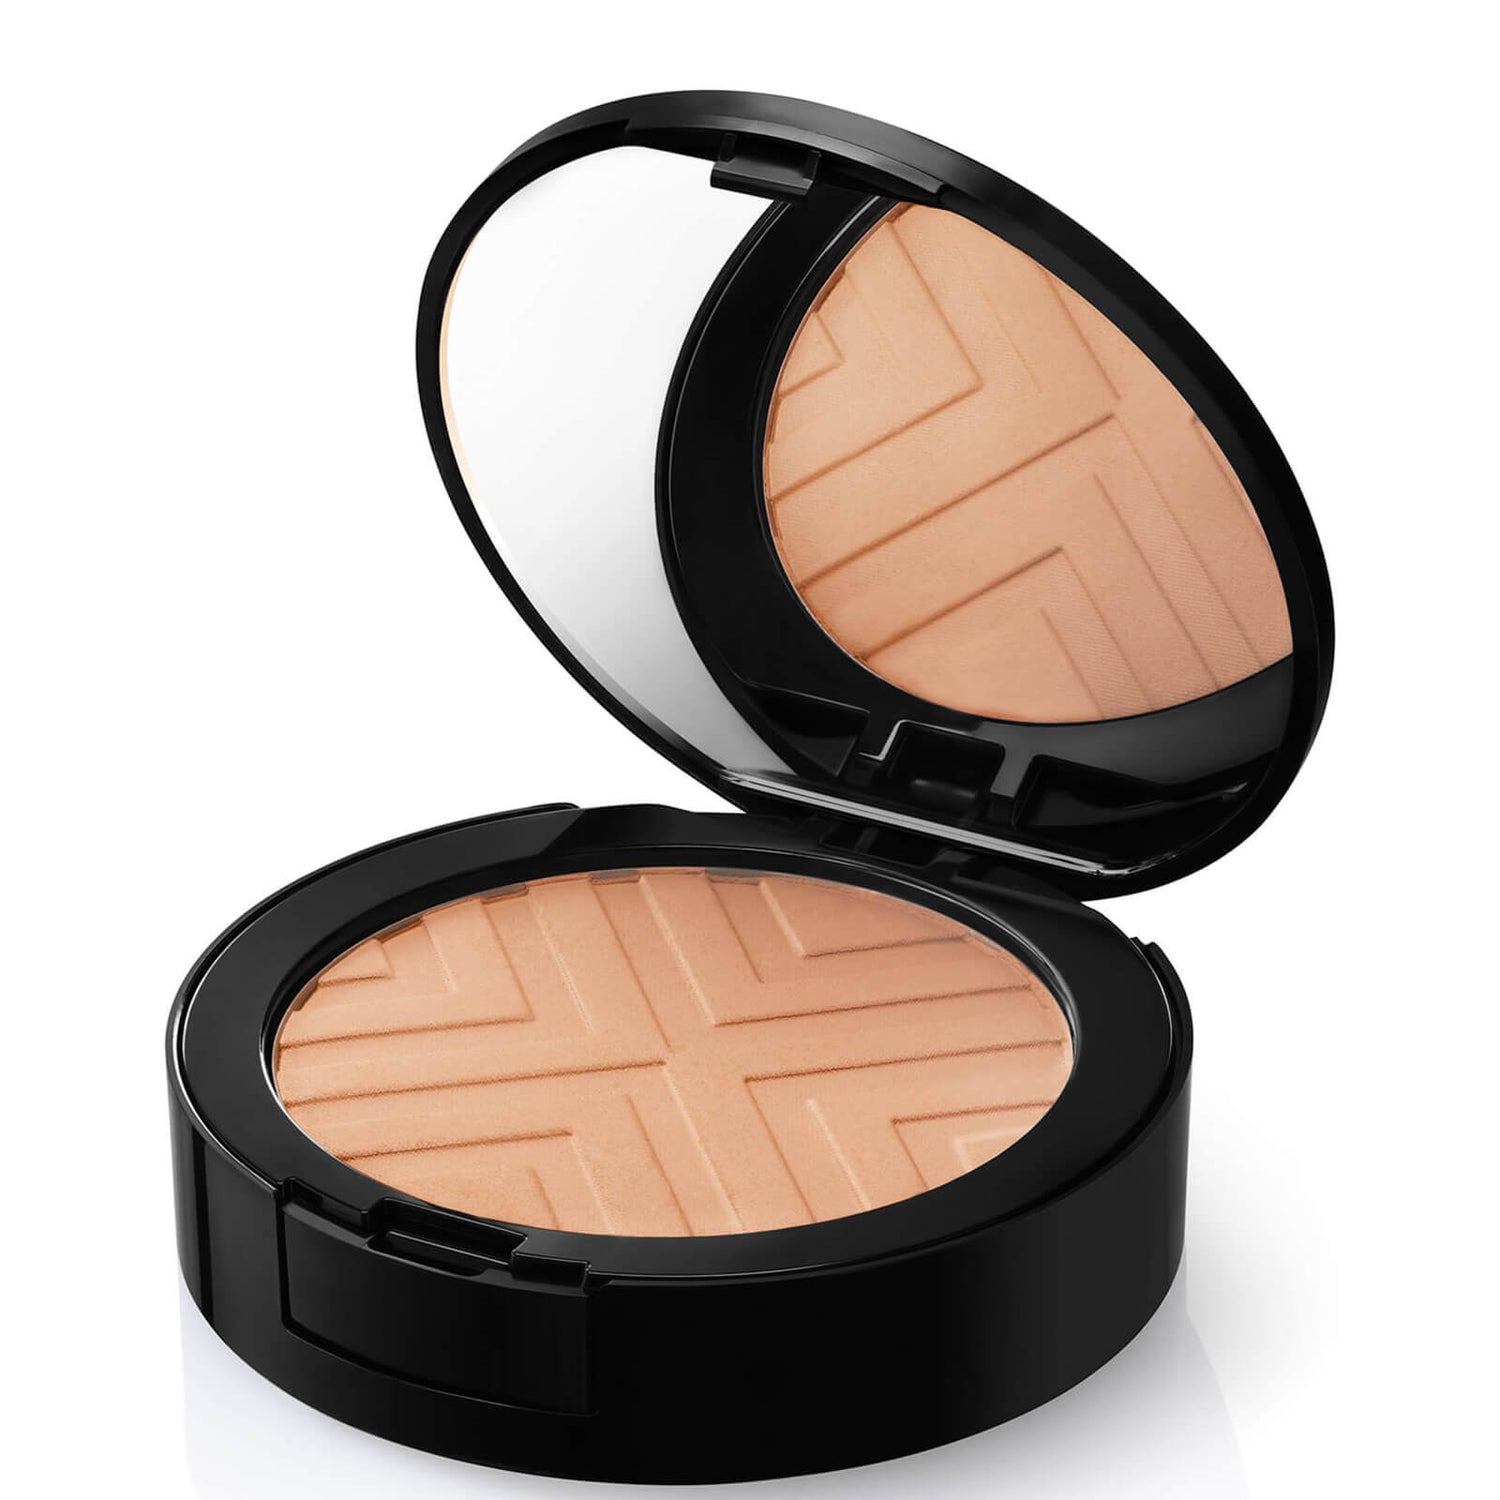 Vichy Dermablend Covermatte Compact Powder Foundation – 35